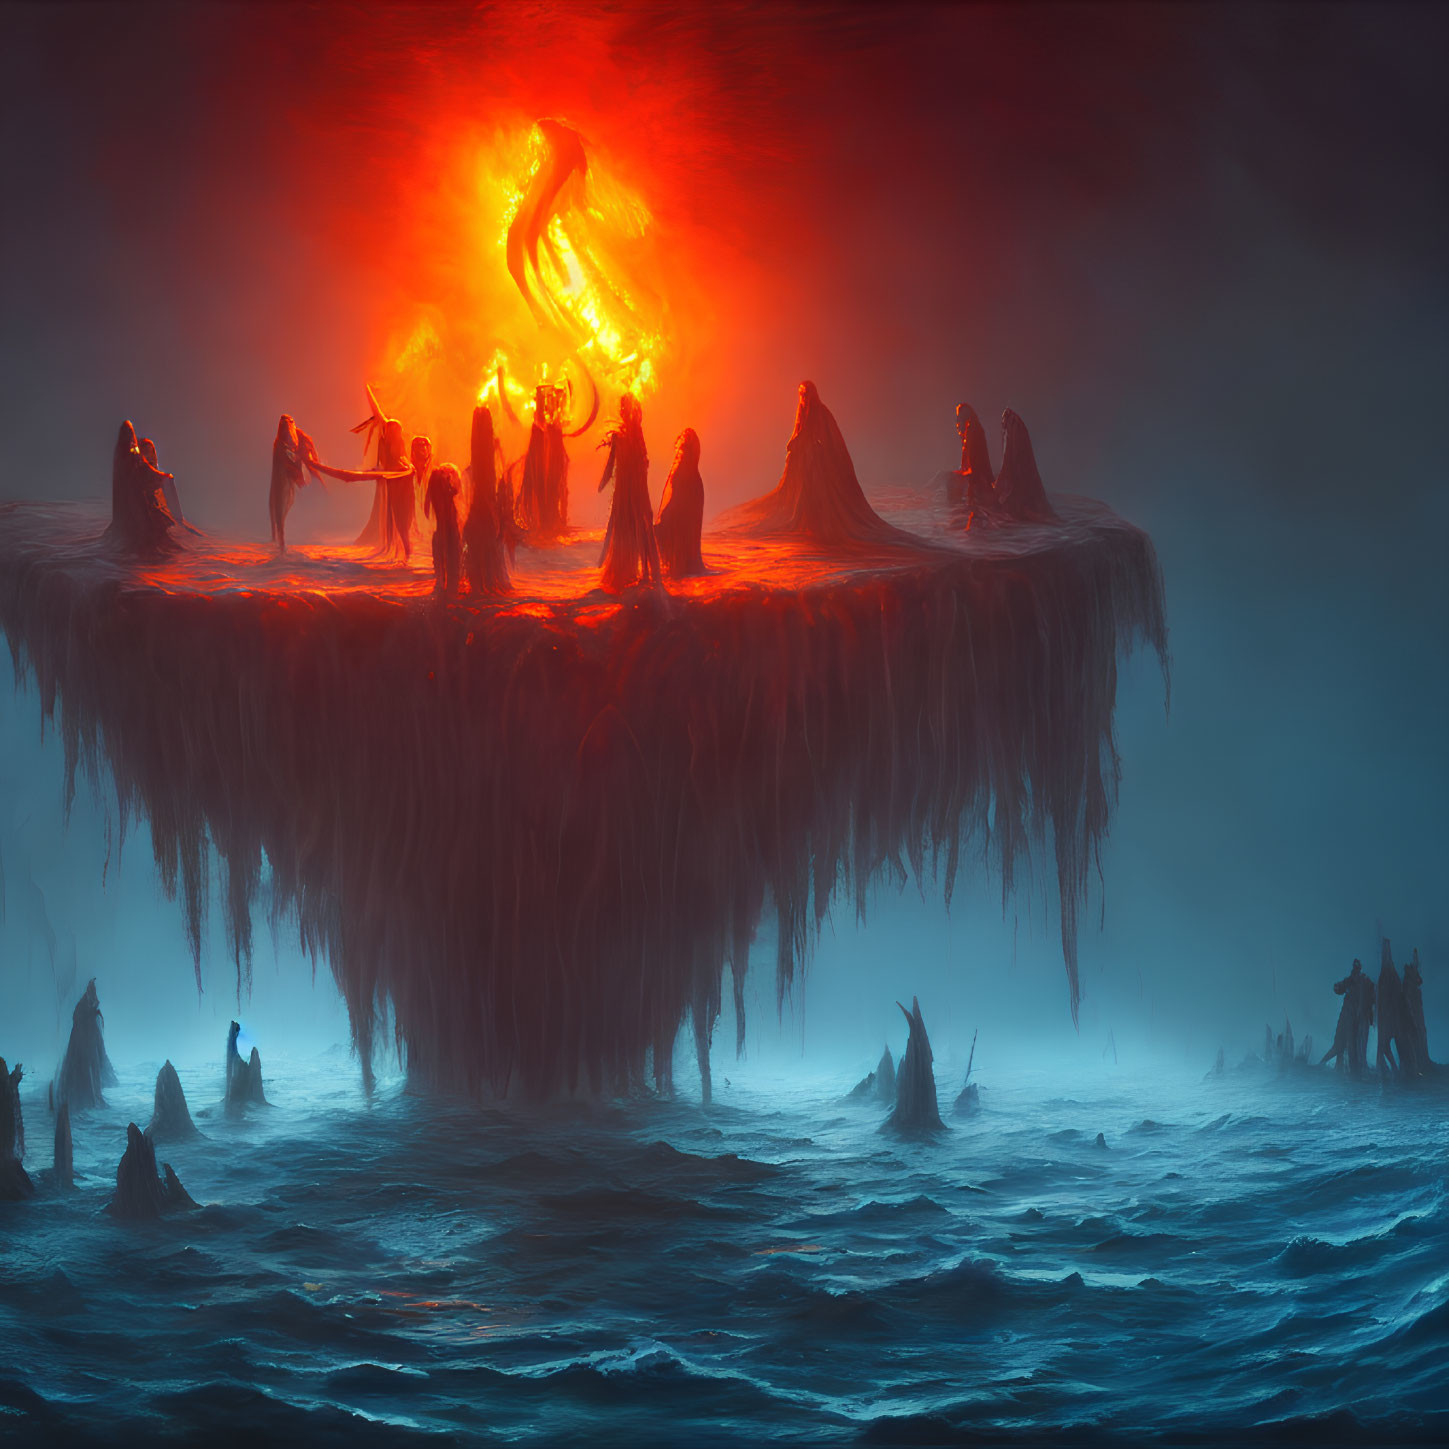 Fantastical floating island with glowing red portal and cloaked figures above sea with silhouetted